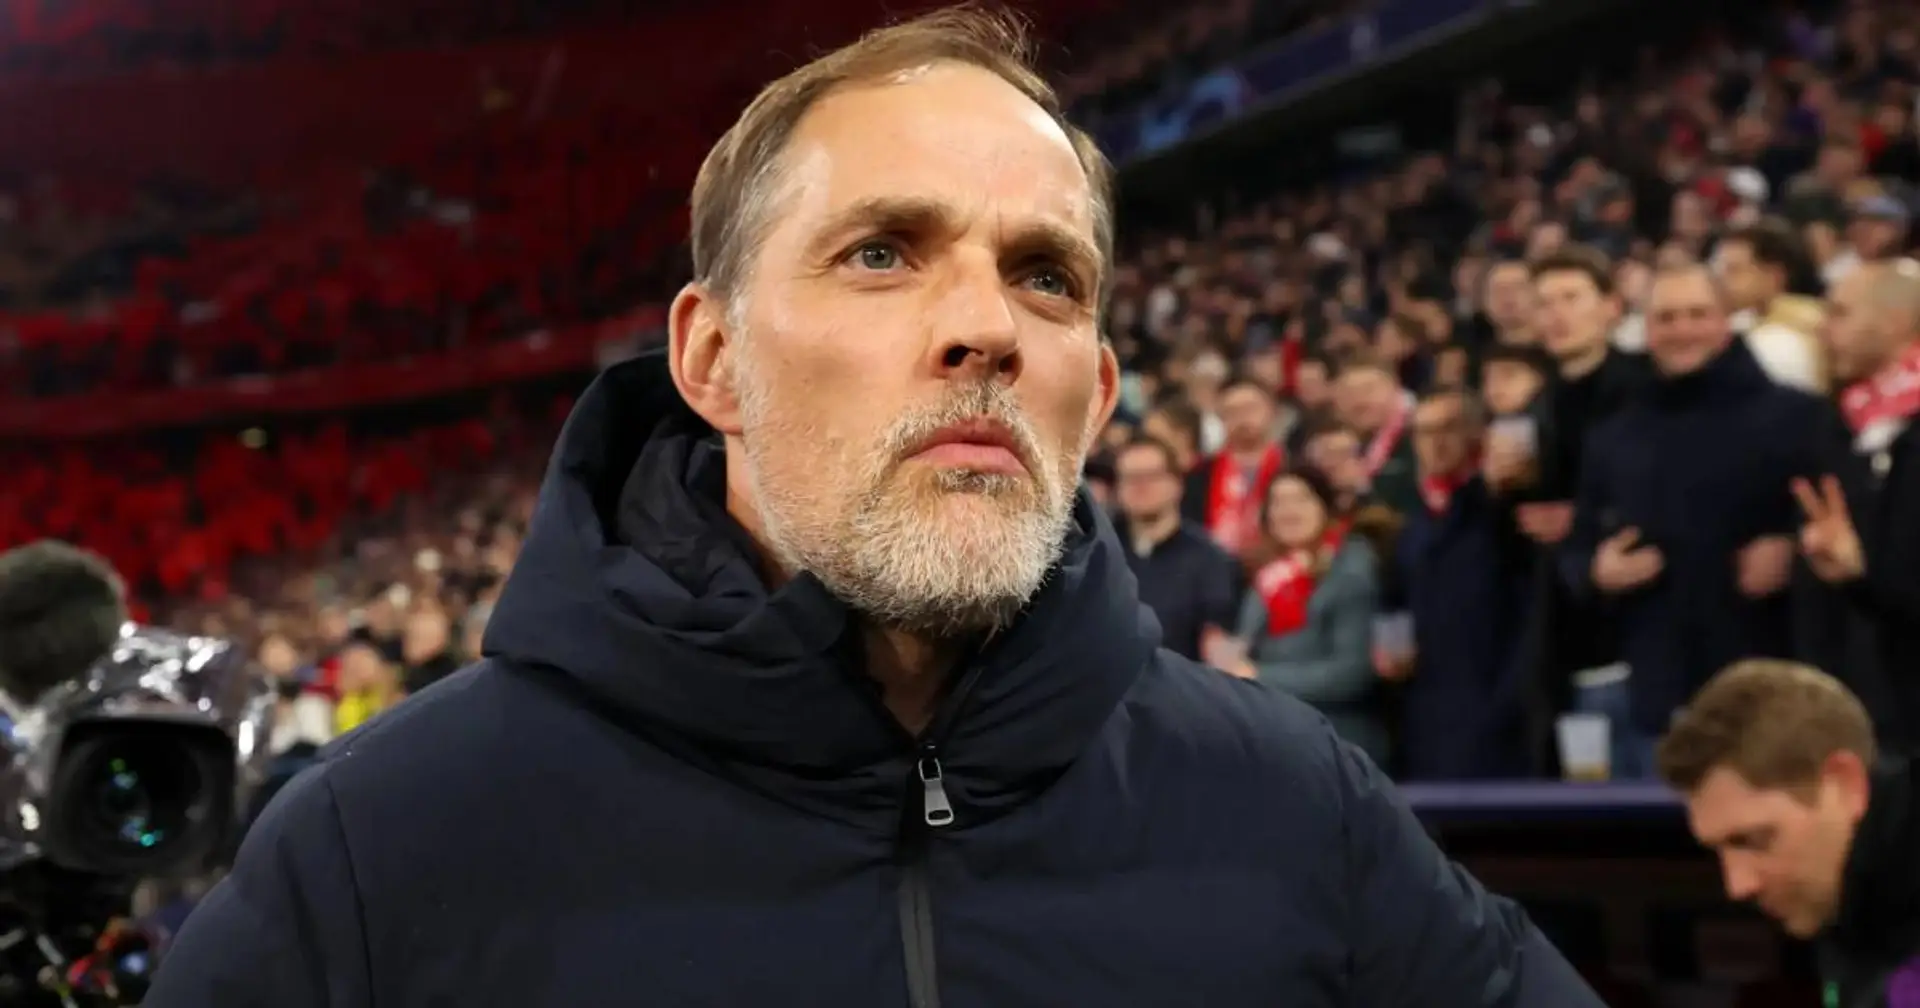 Thomas Tuchel's 'primary goal' is to manage Man United (reliability: 5 stars)